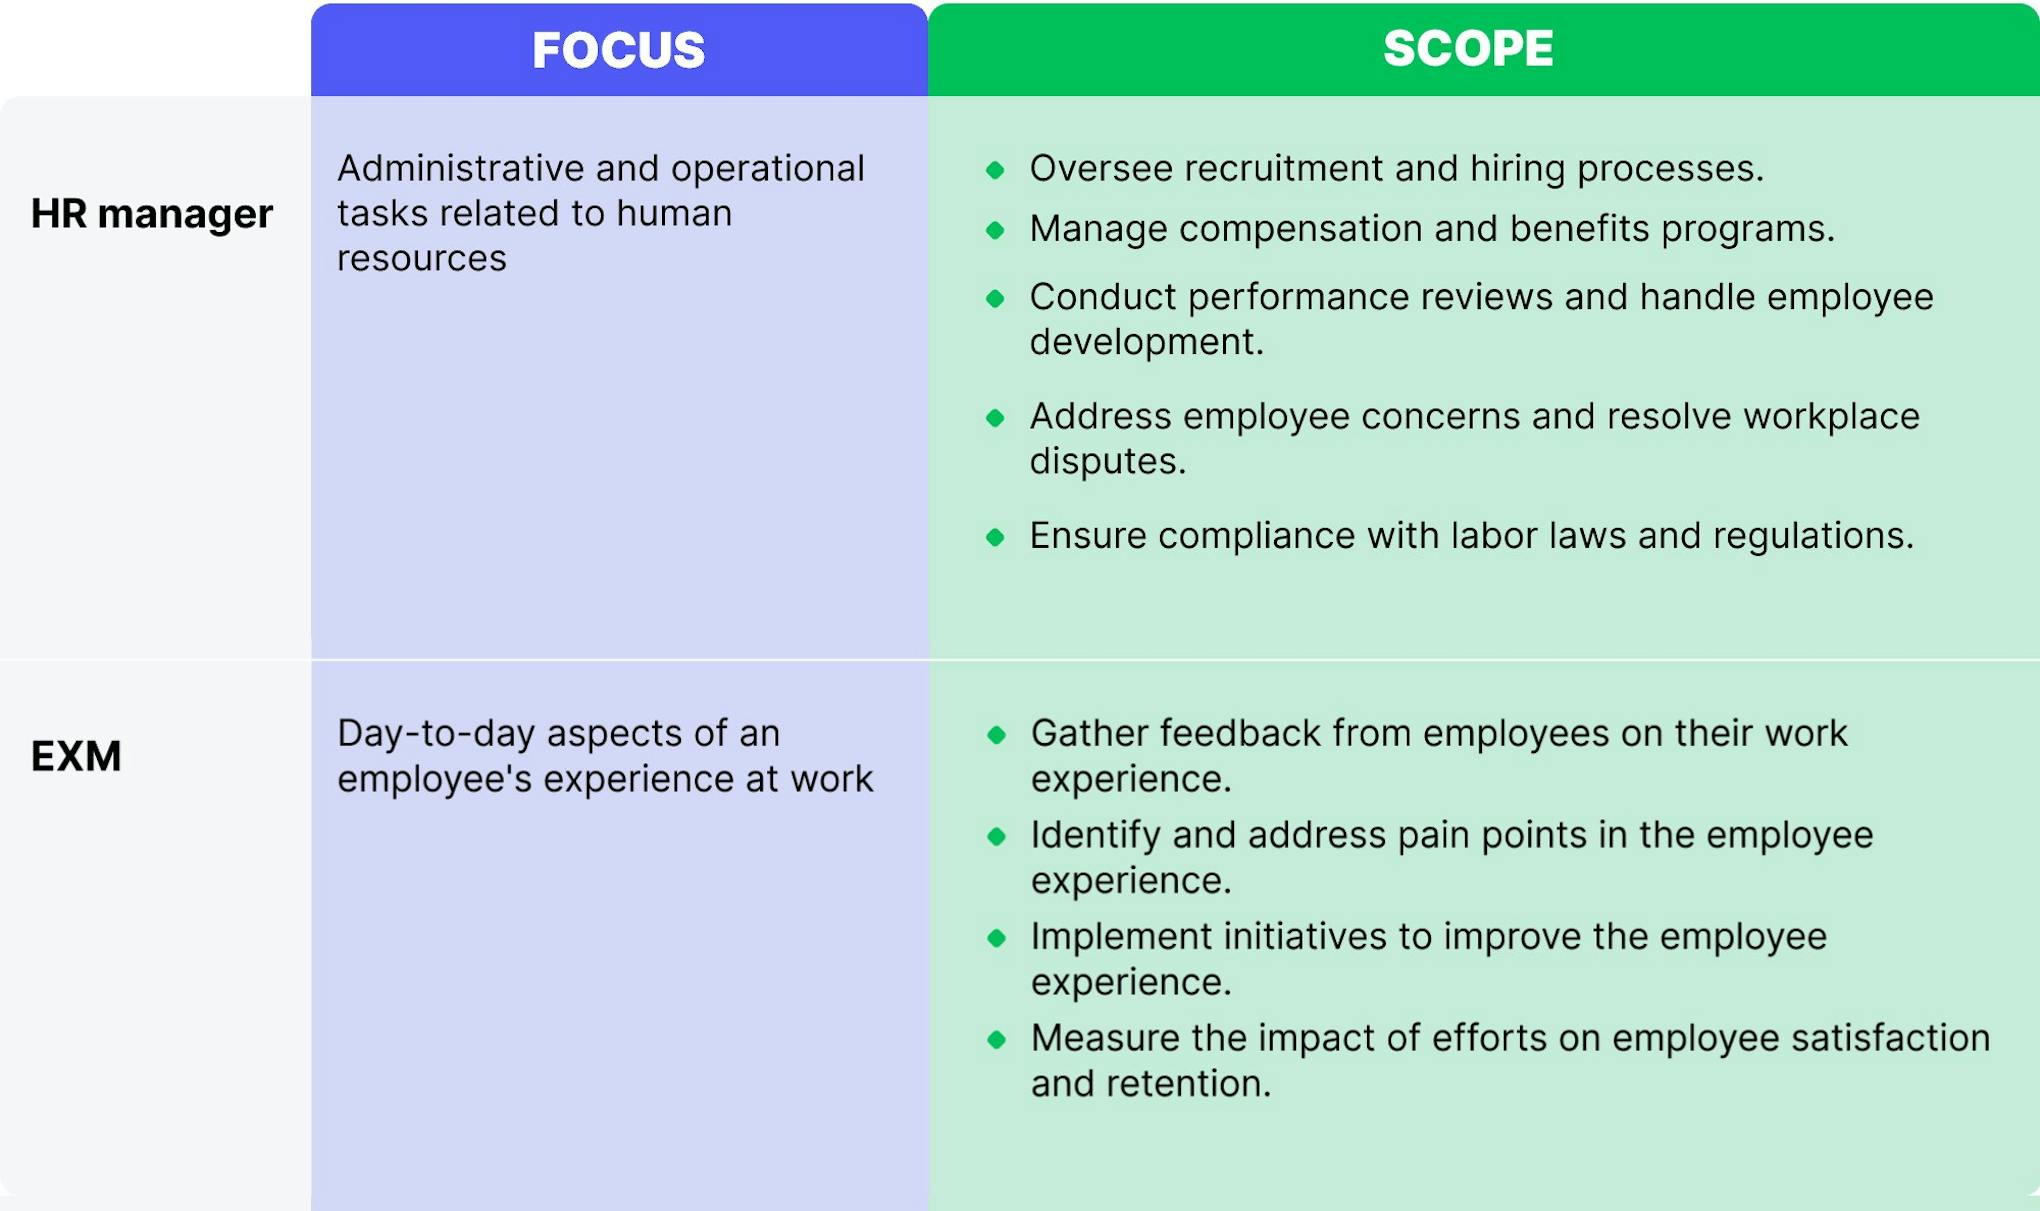 Key differences between HR manager and EXM